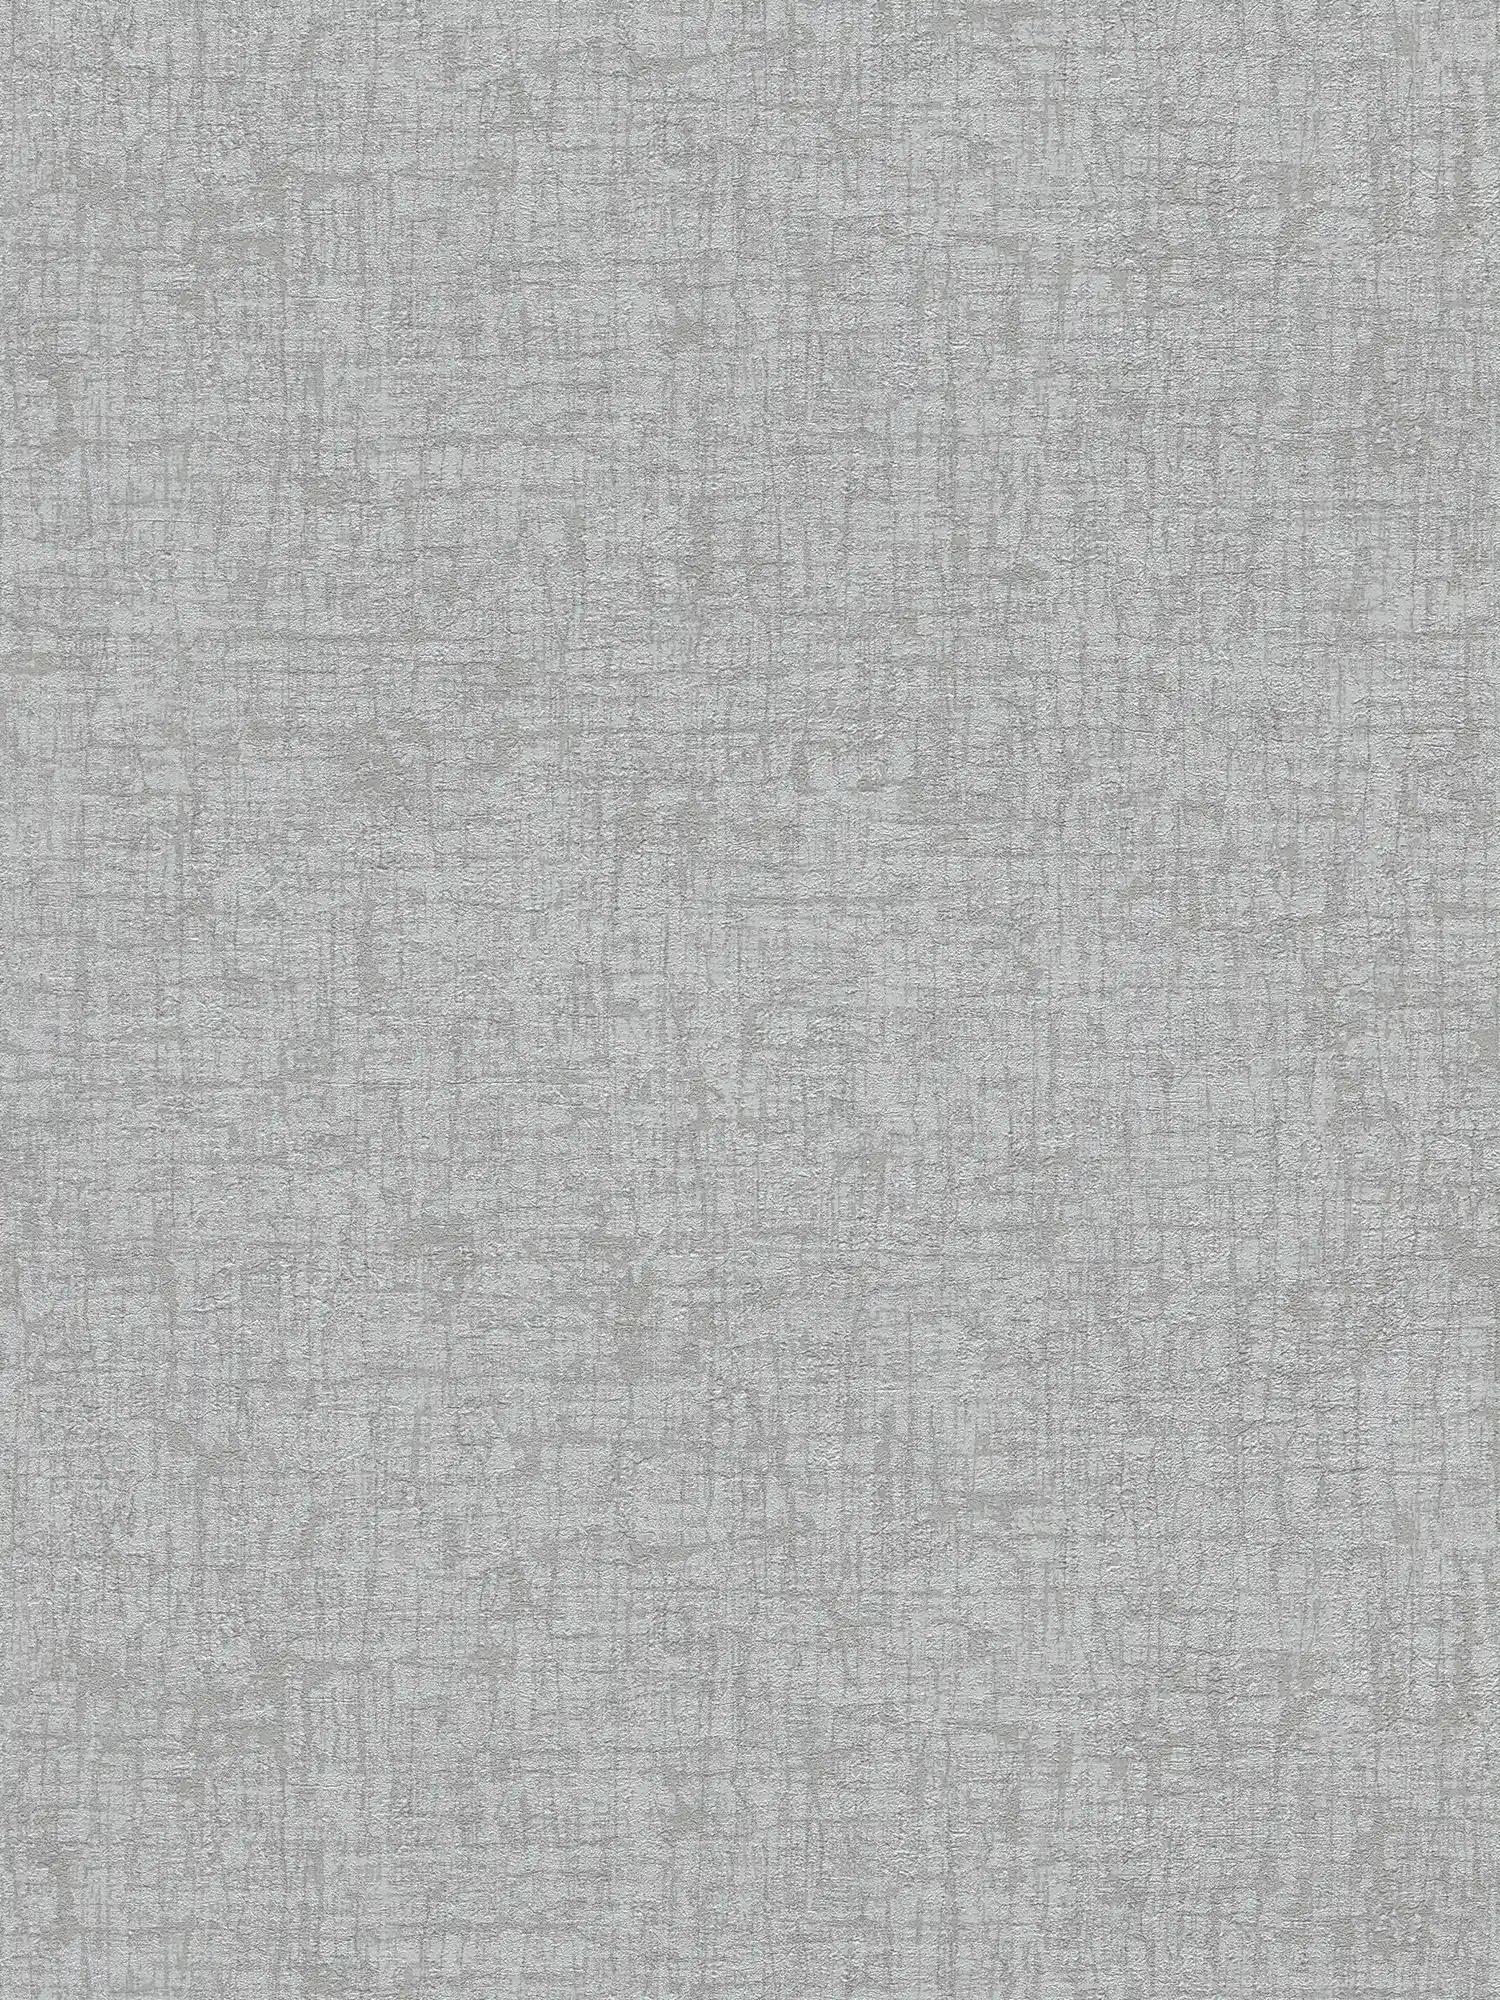 Textured non-woven wallpaper with a slightly glossy textile look - grey, dark grey
